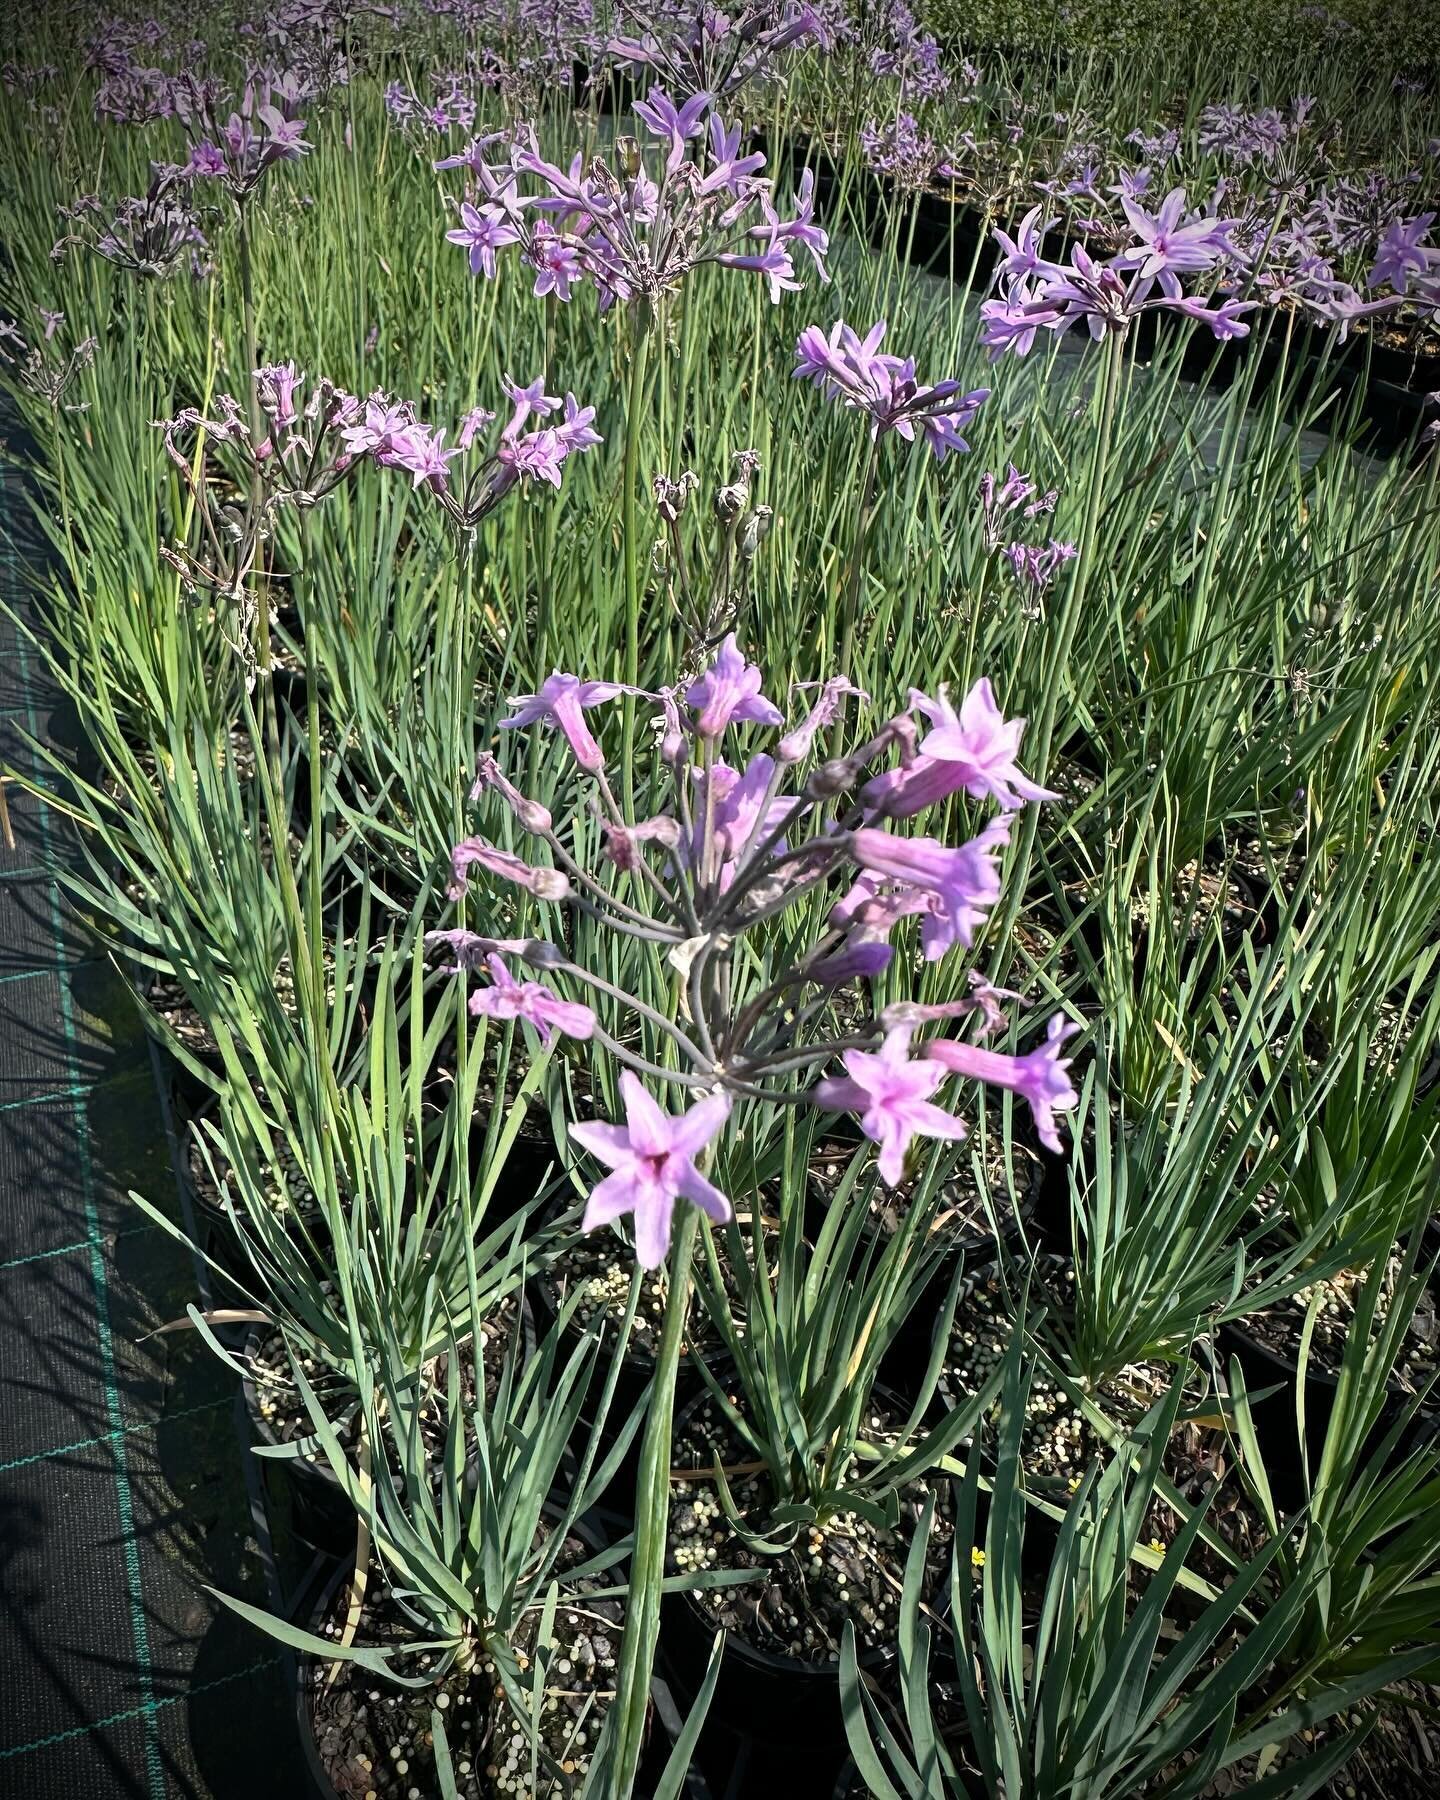 Tulbaghia violacea 140mm is a true garden stalwart, lovely for ground cover plantings, edging, pots or as an unusual addition to the kitchen garden. Long flowering from Spring through to late winter. Water wise and pollinator friendly.

#kn #kenthurs